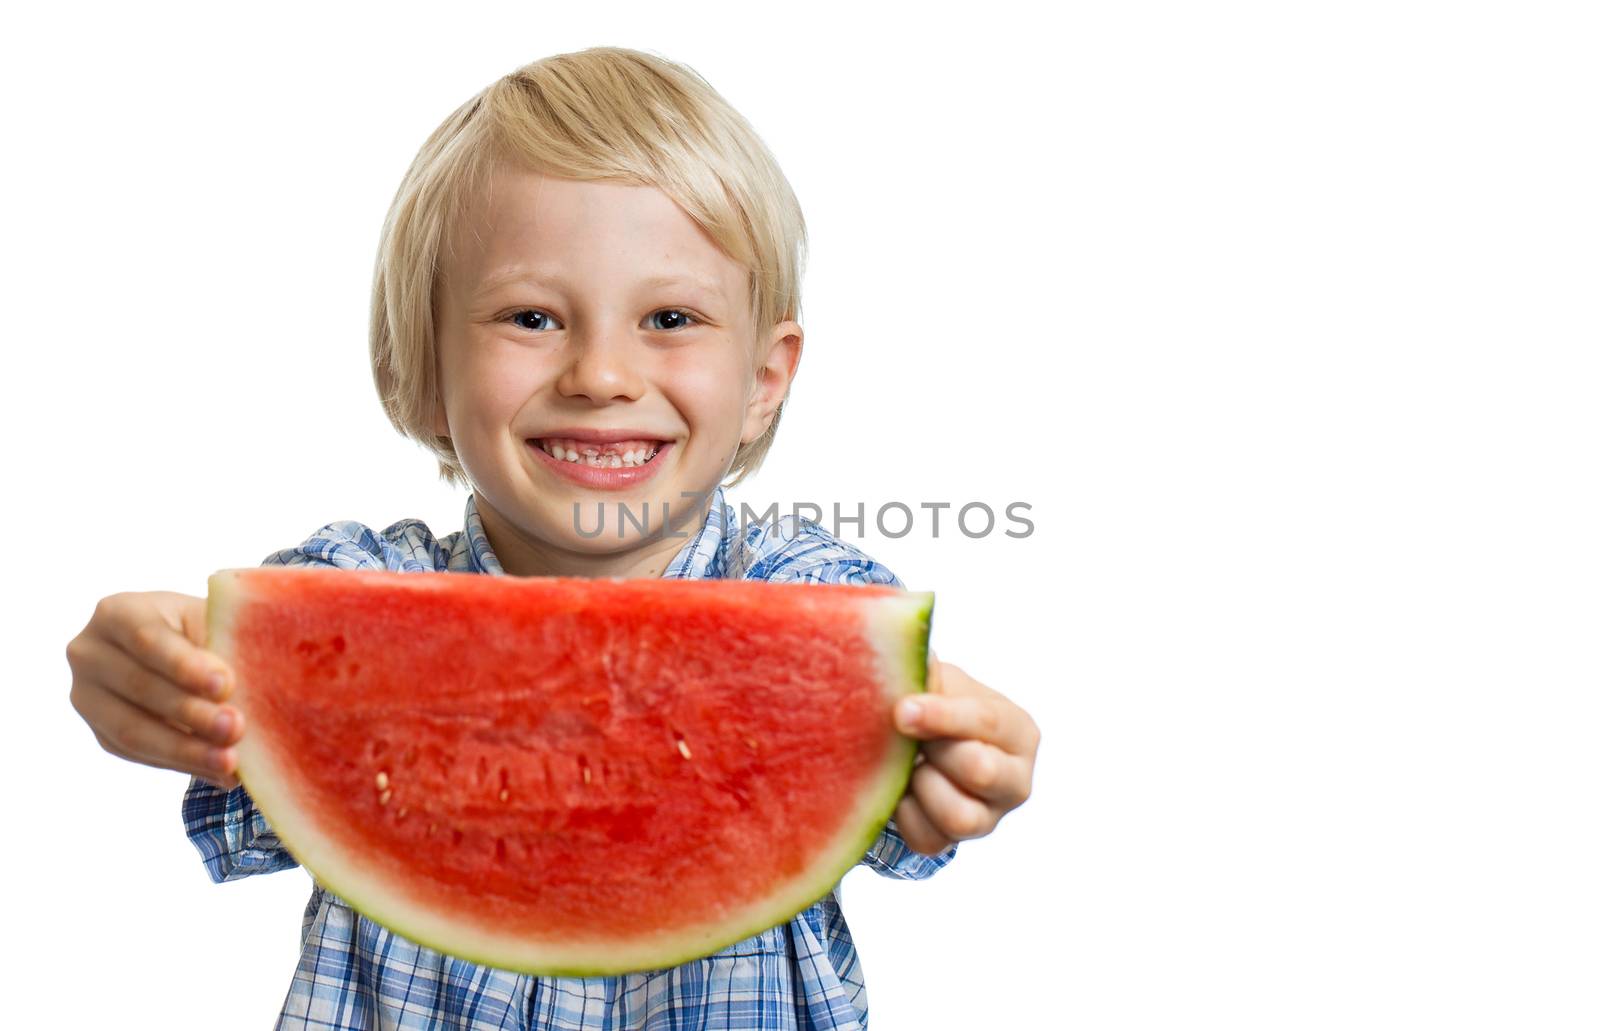 A smiling boy holding out a big juicy slice of watermelon. Isolated on white.